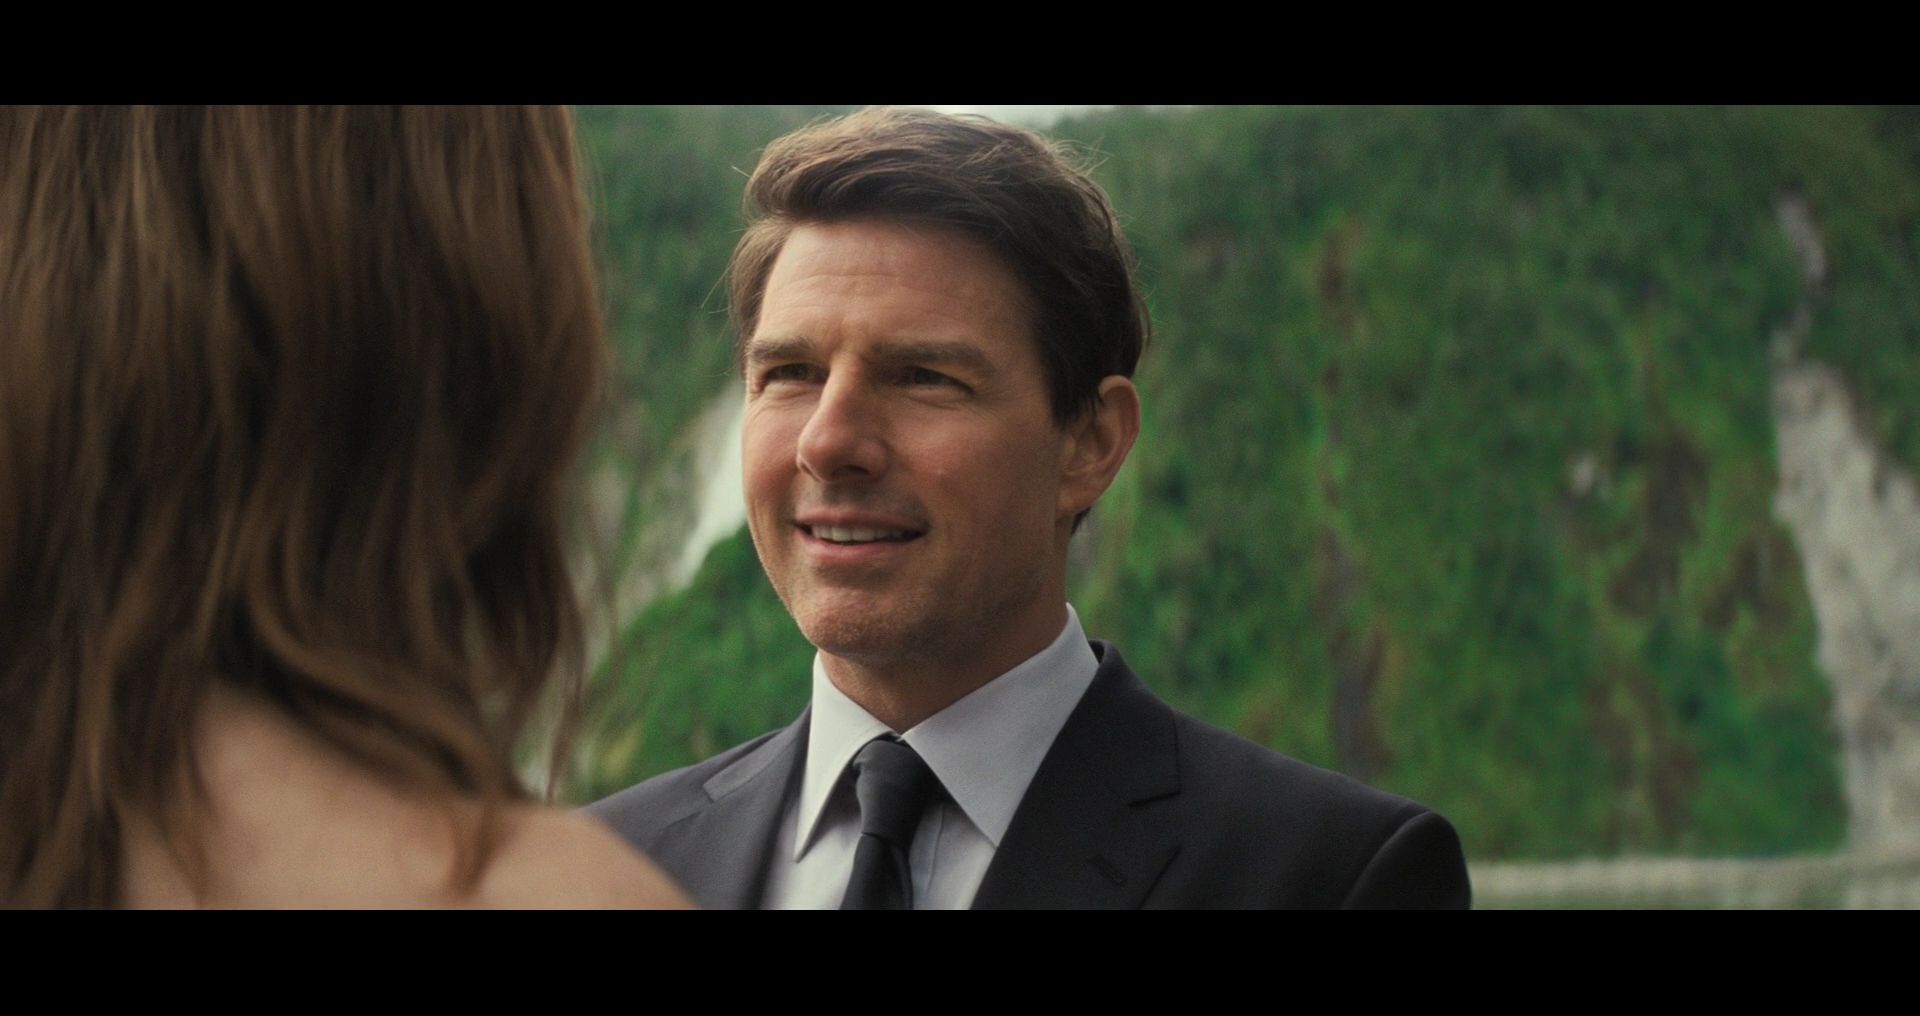 Mission-Impossible-Fallout-0022.jpg